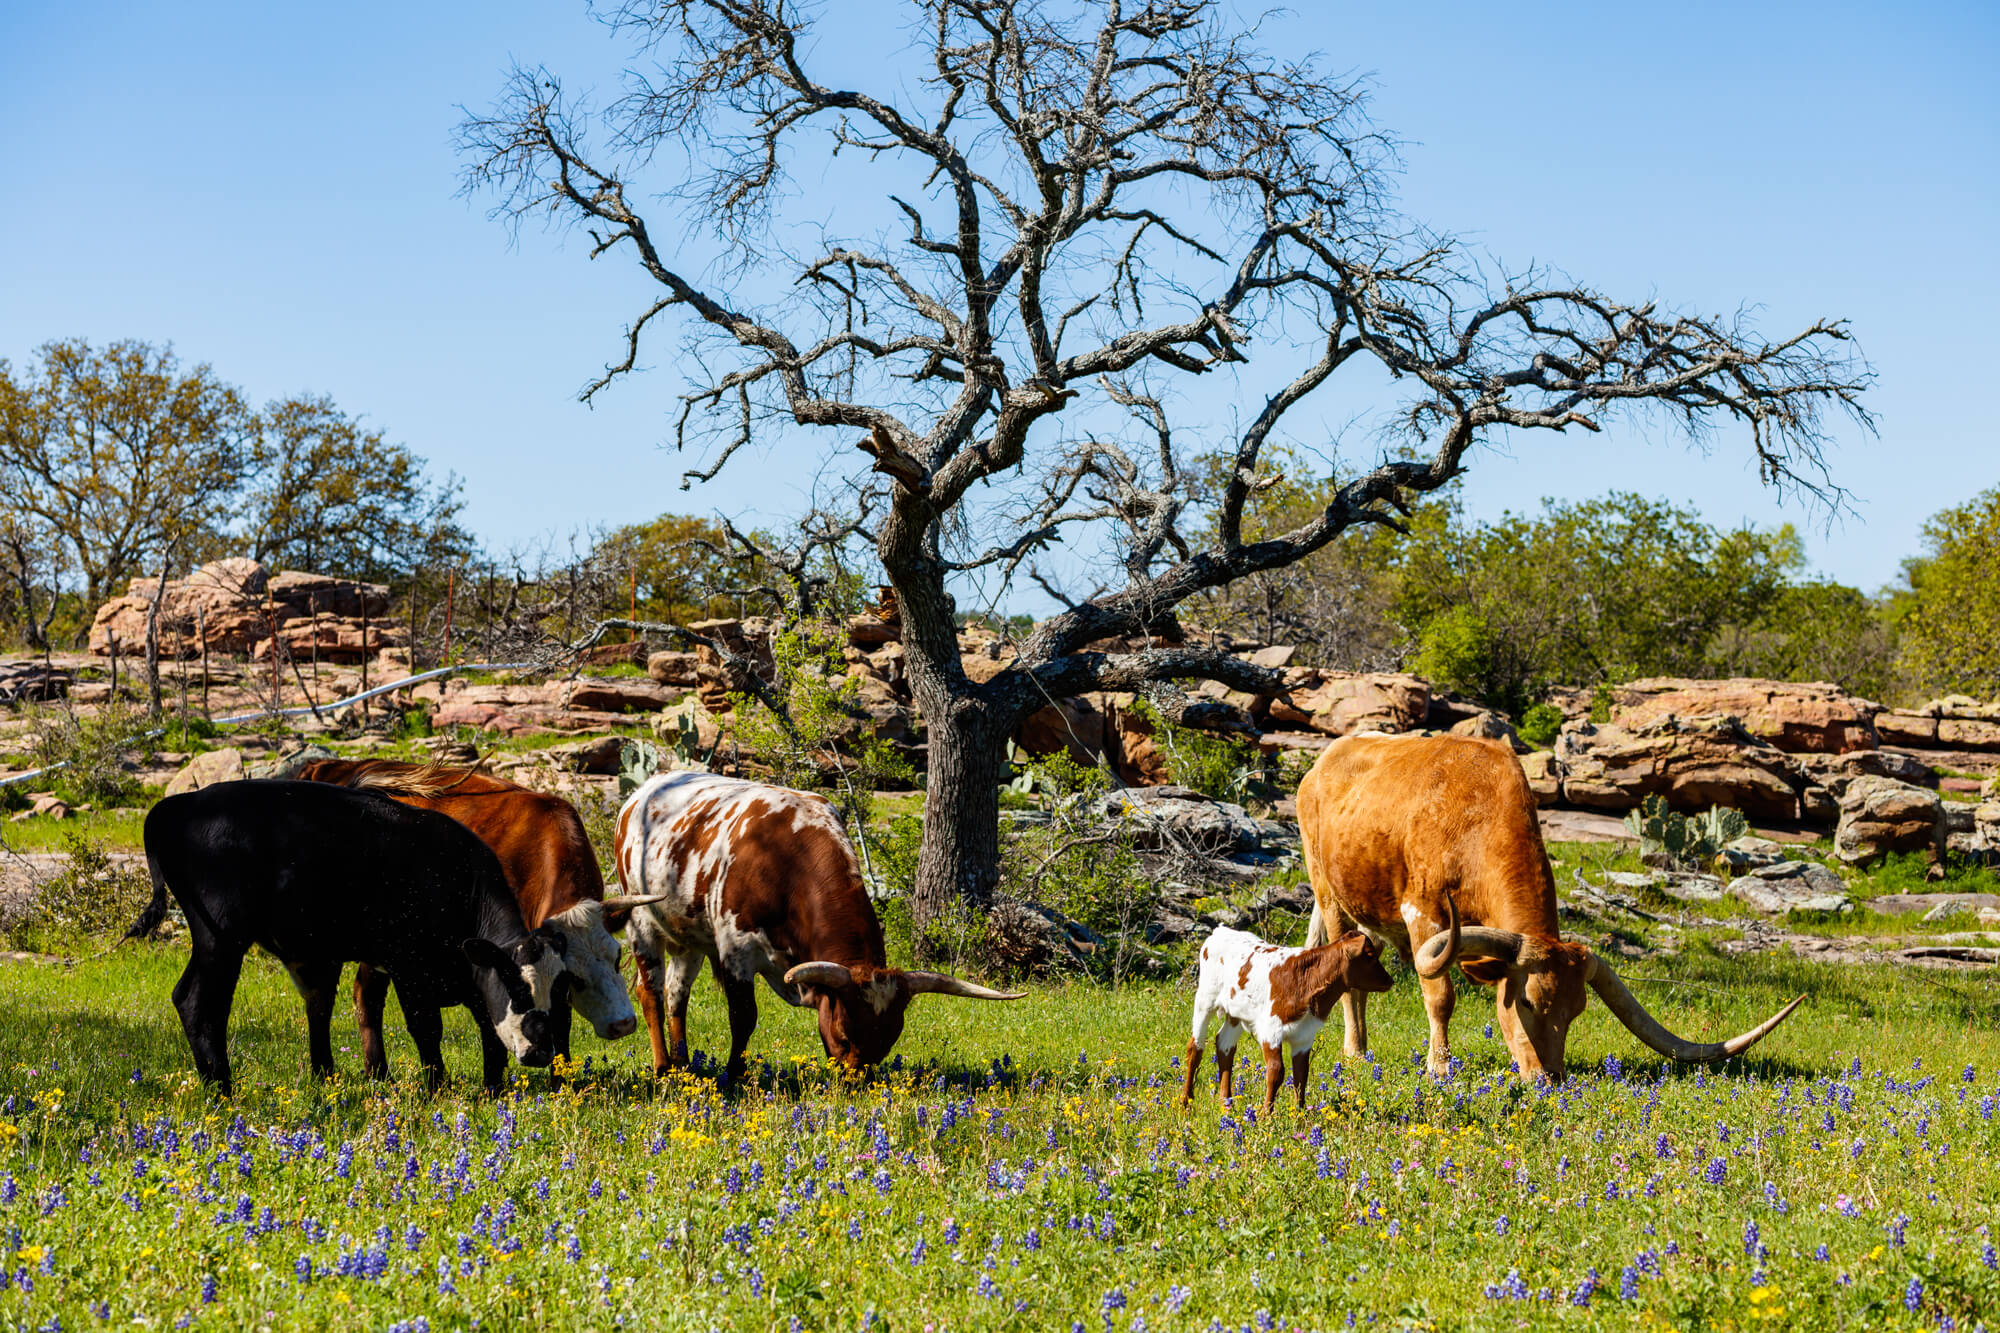 Buying a Ranch In West Texas: What You Need To Consider